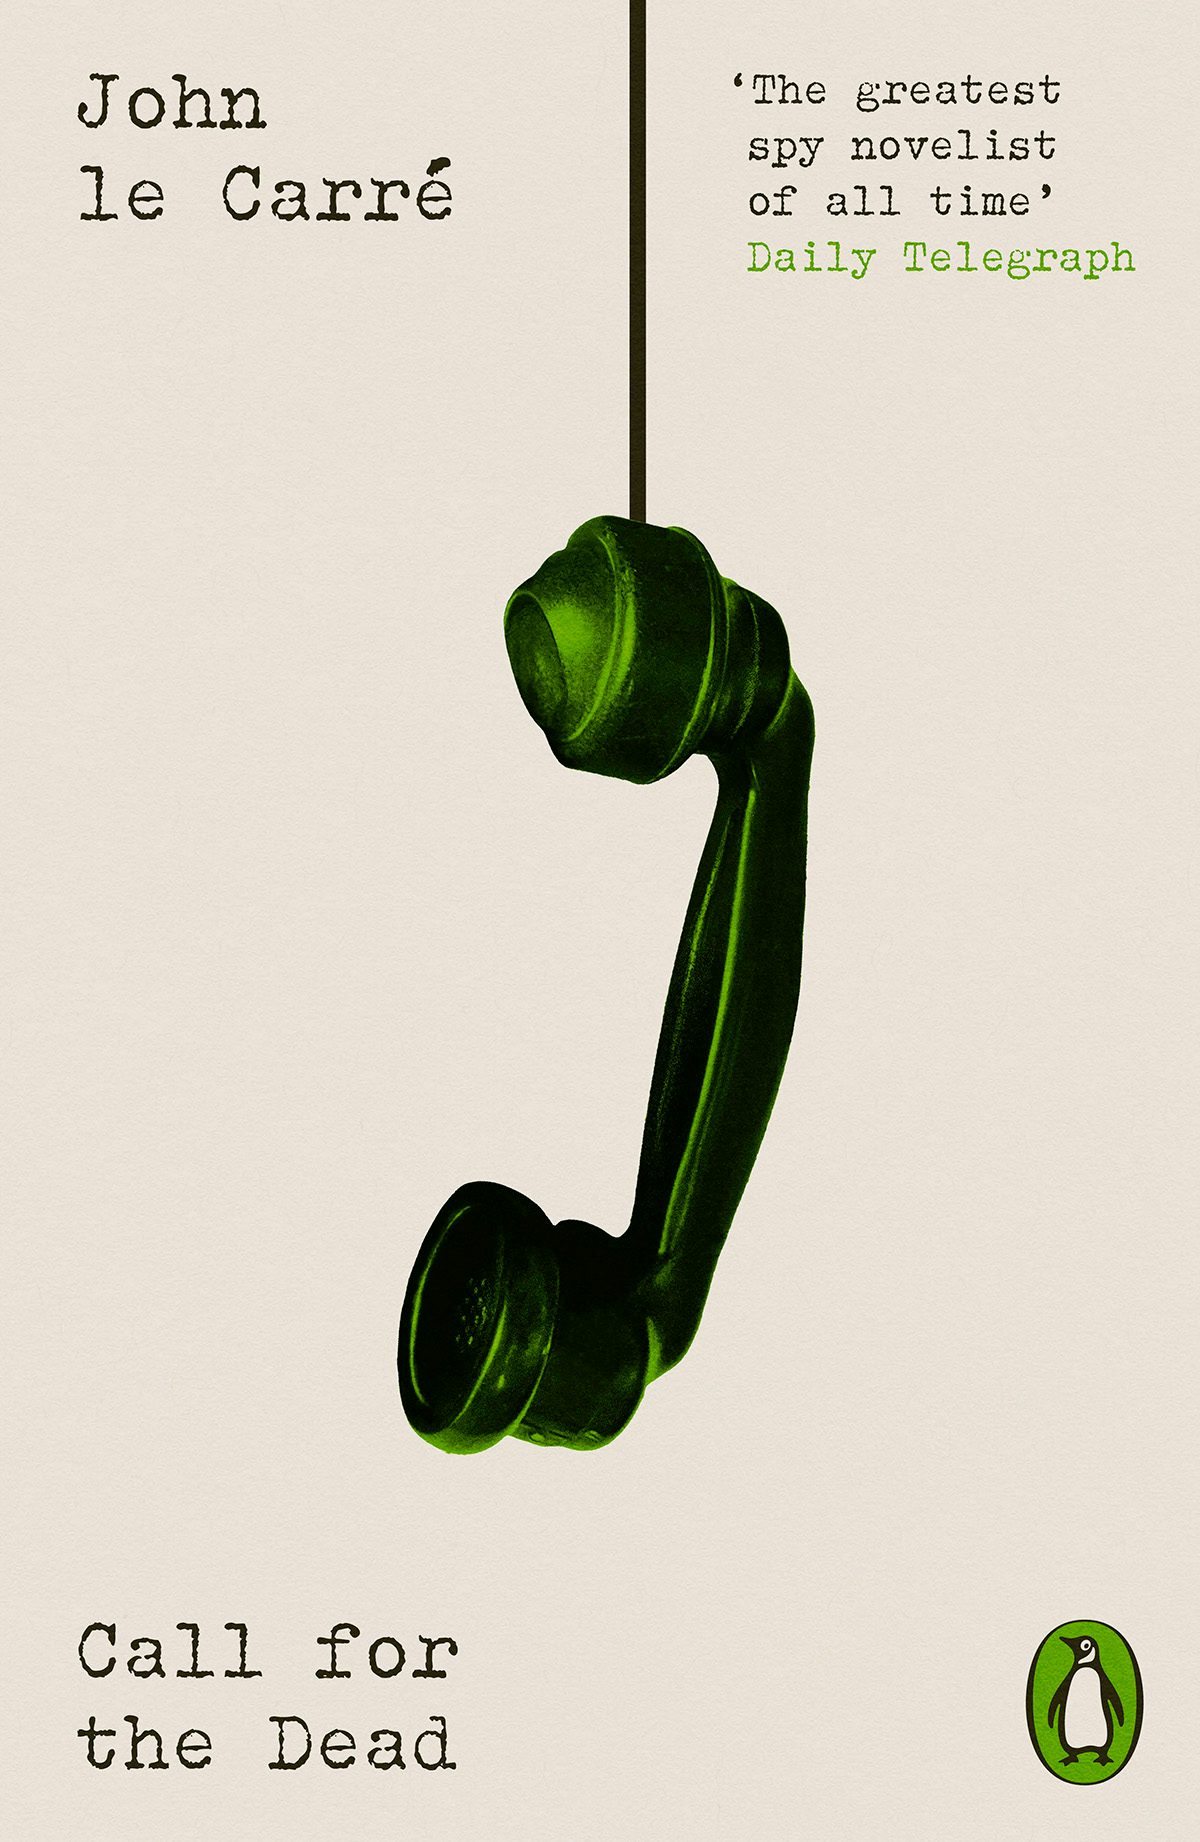 Image shows the cover of Call for the Dead from Penguin Modern Classics Crime and Espionage series, showing a cut out of a telephone receiver hanging upside down by a cord leading to the top of the cover